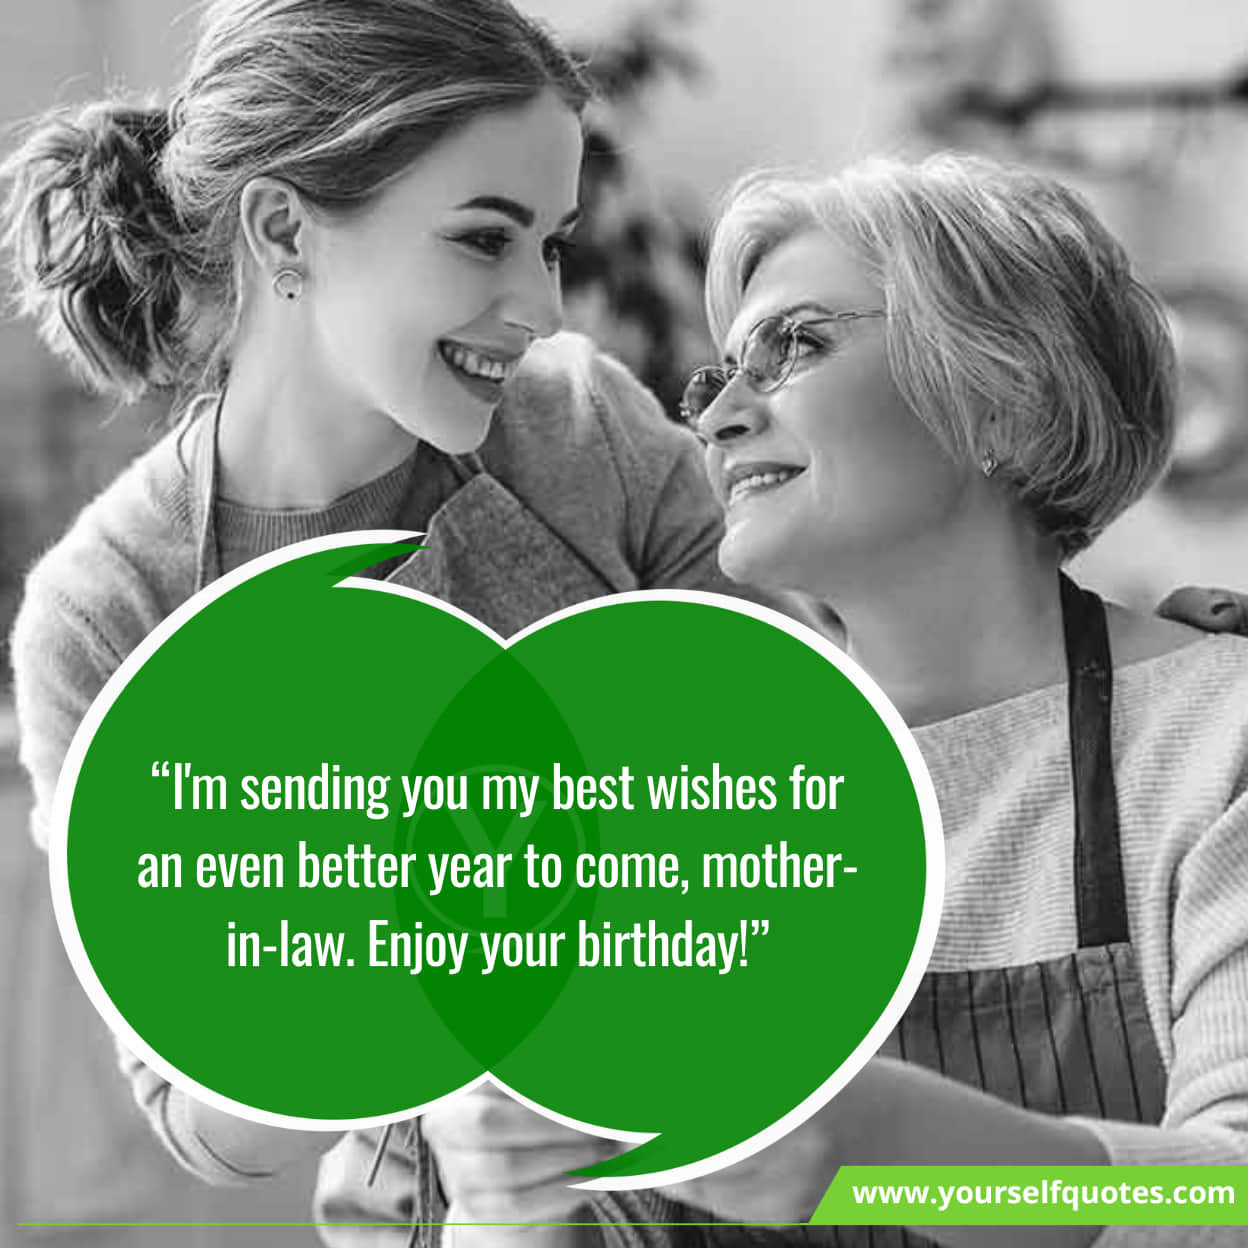 Unique Birthday Wishes for Mother in law